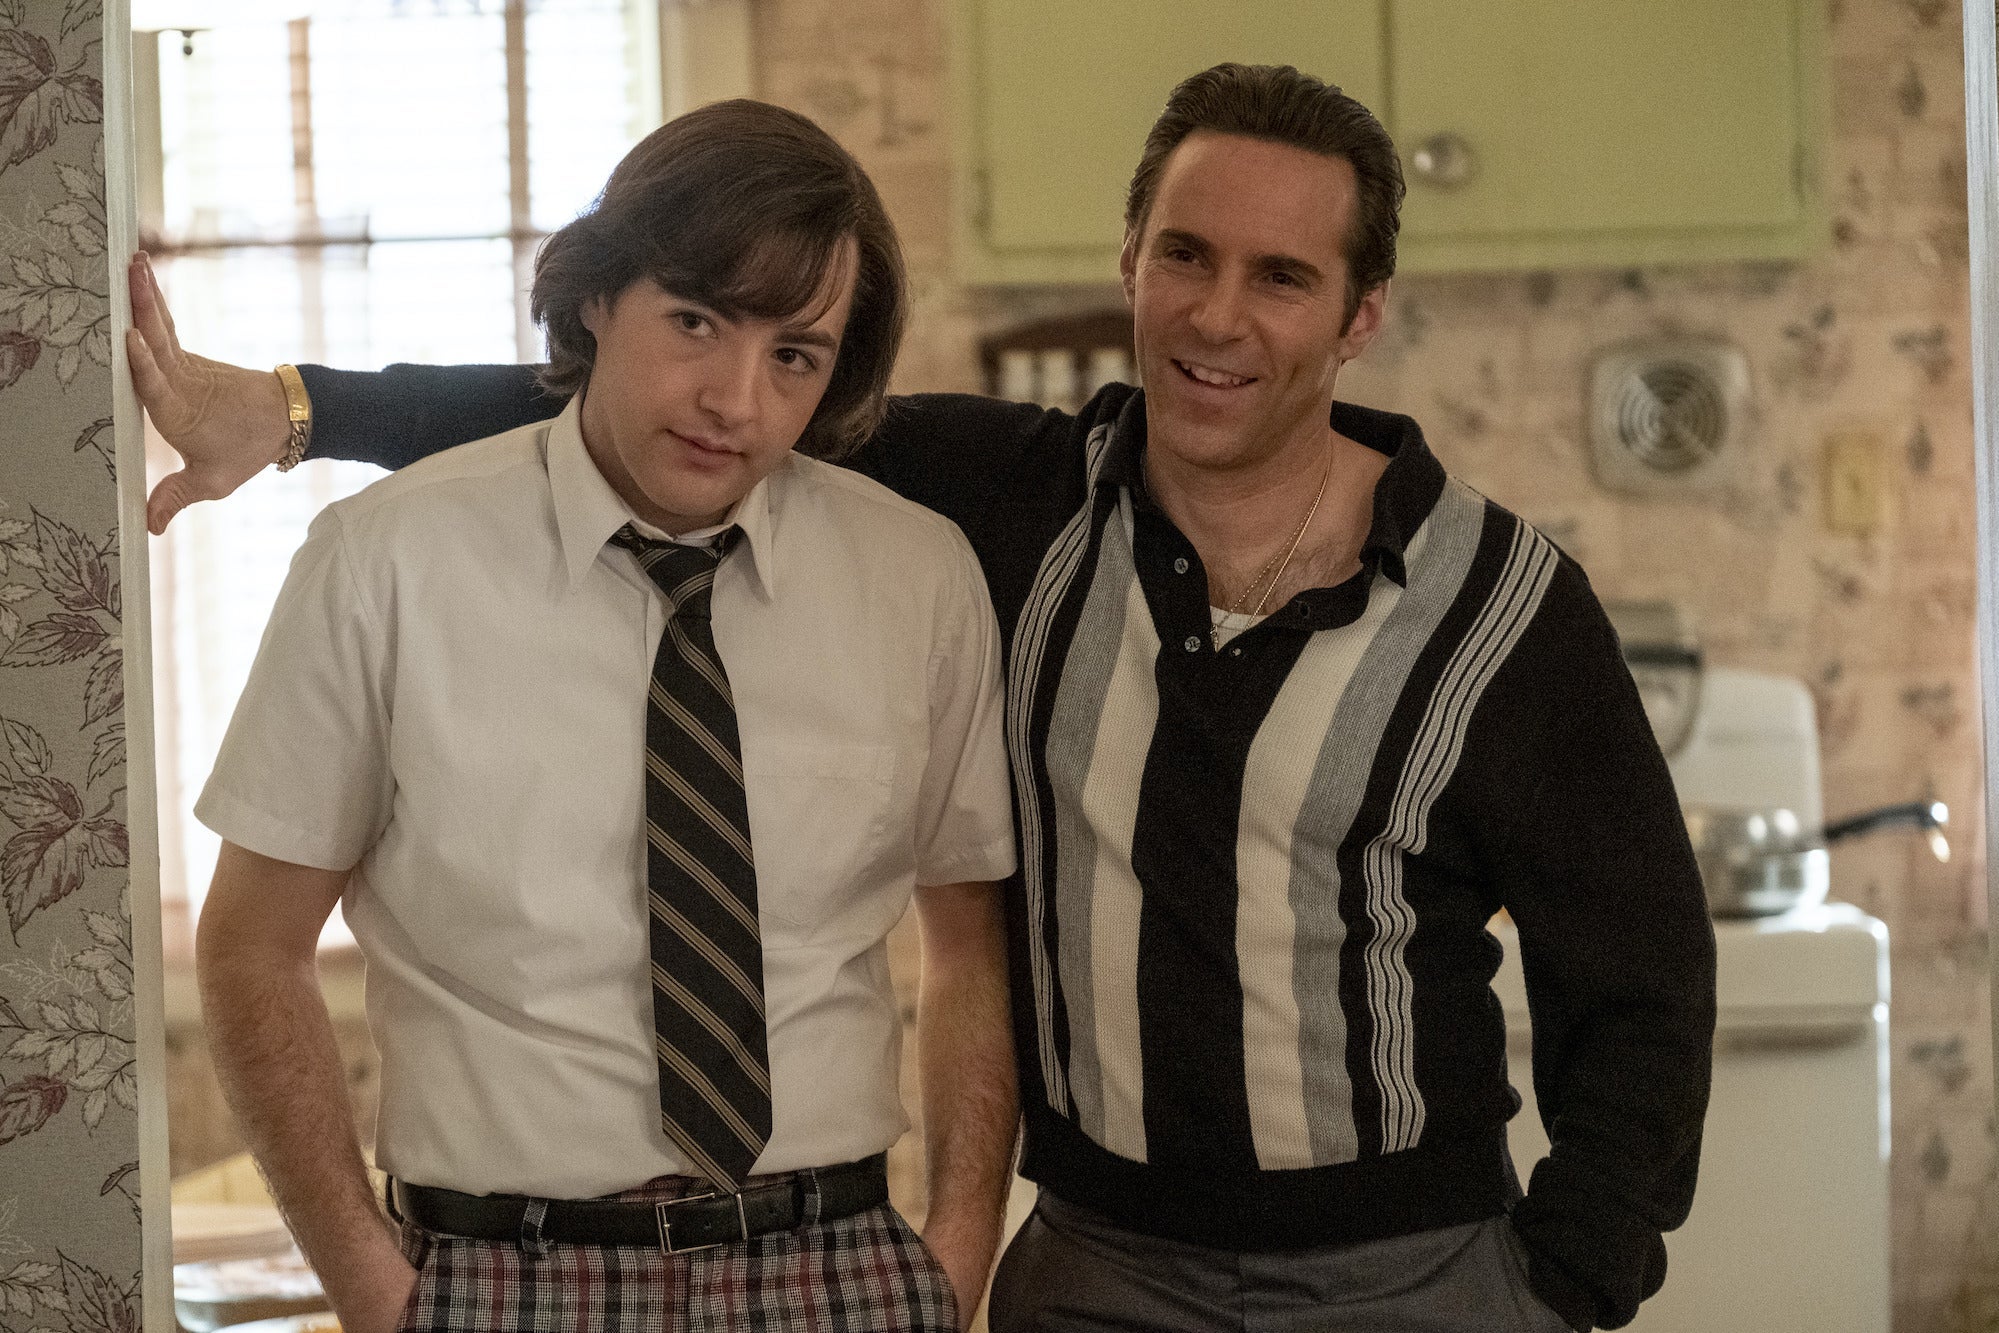 Michael Gandolfini as young Tony standing with stooped shoulders in a kitchen with Alessandro Nivola as Tony's uncle Dickie smiling and leaning over him